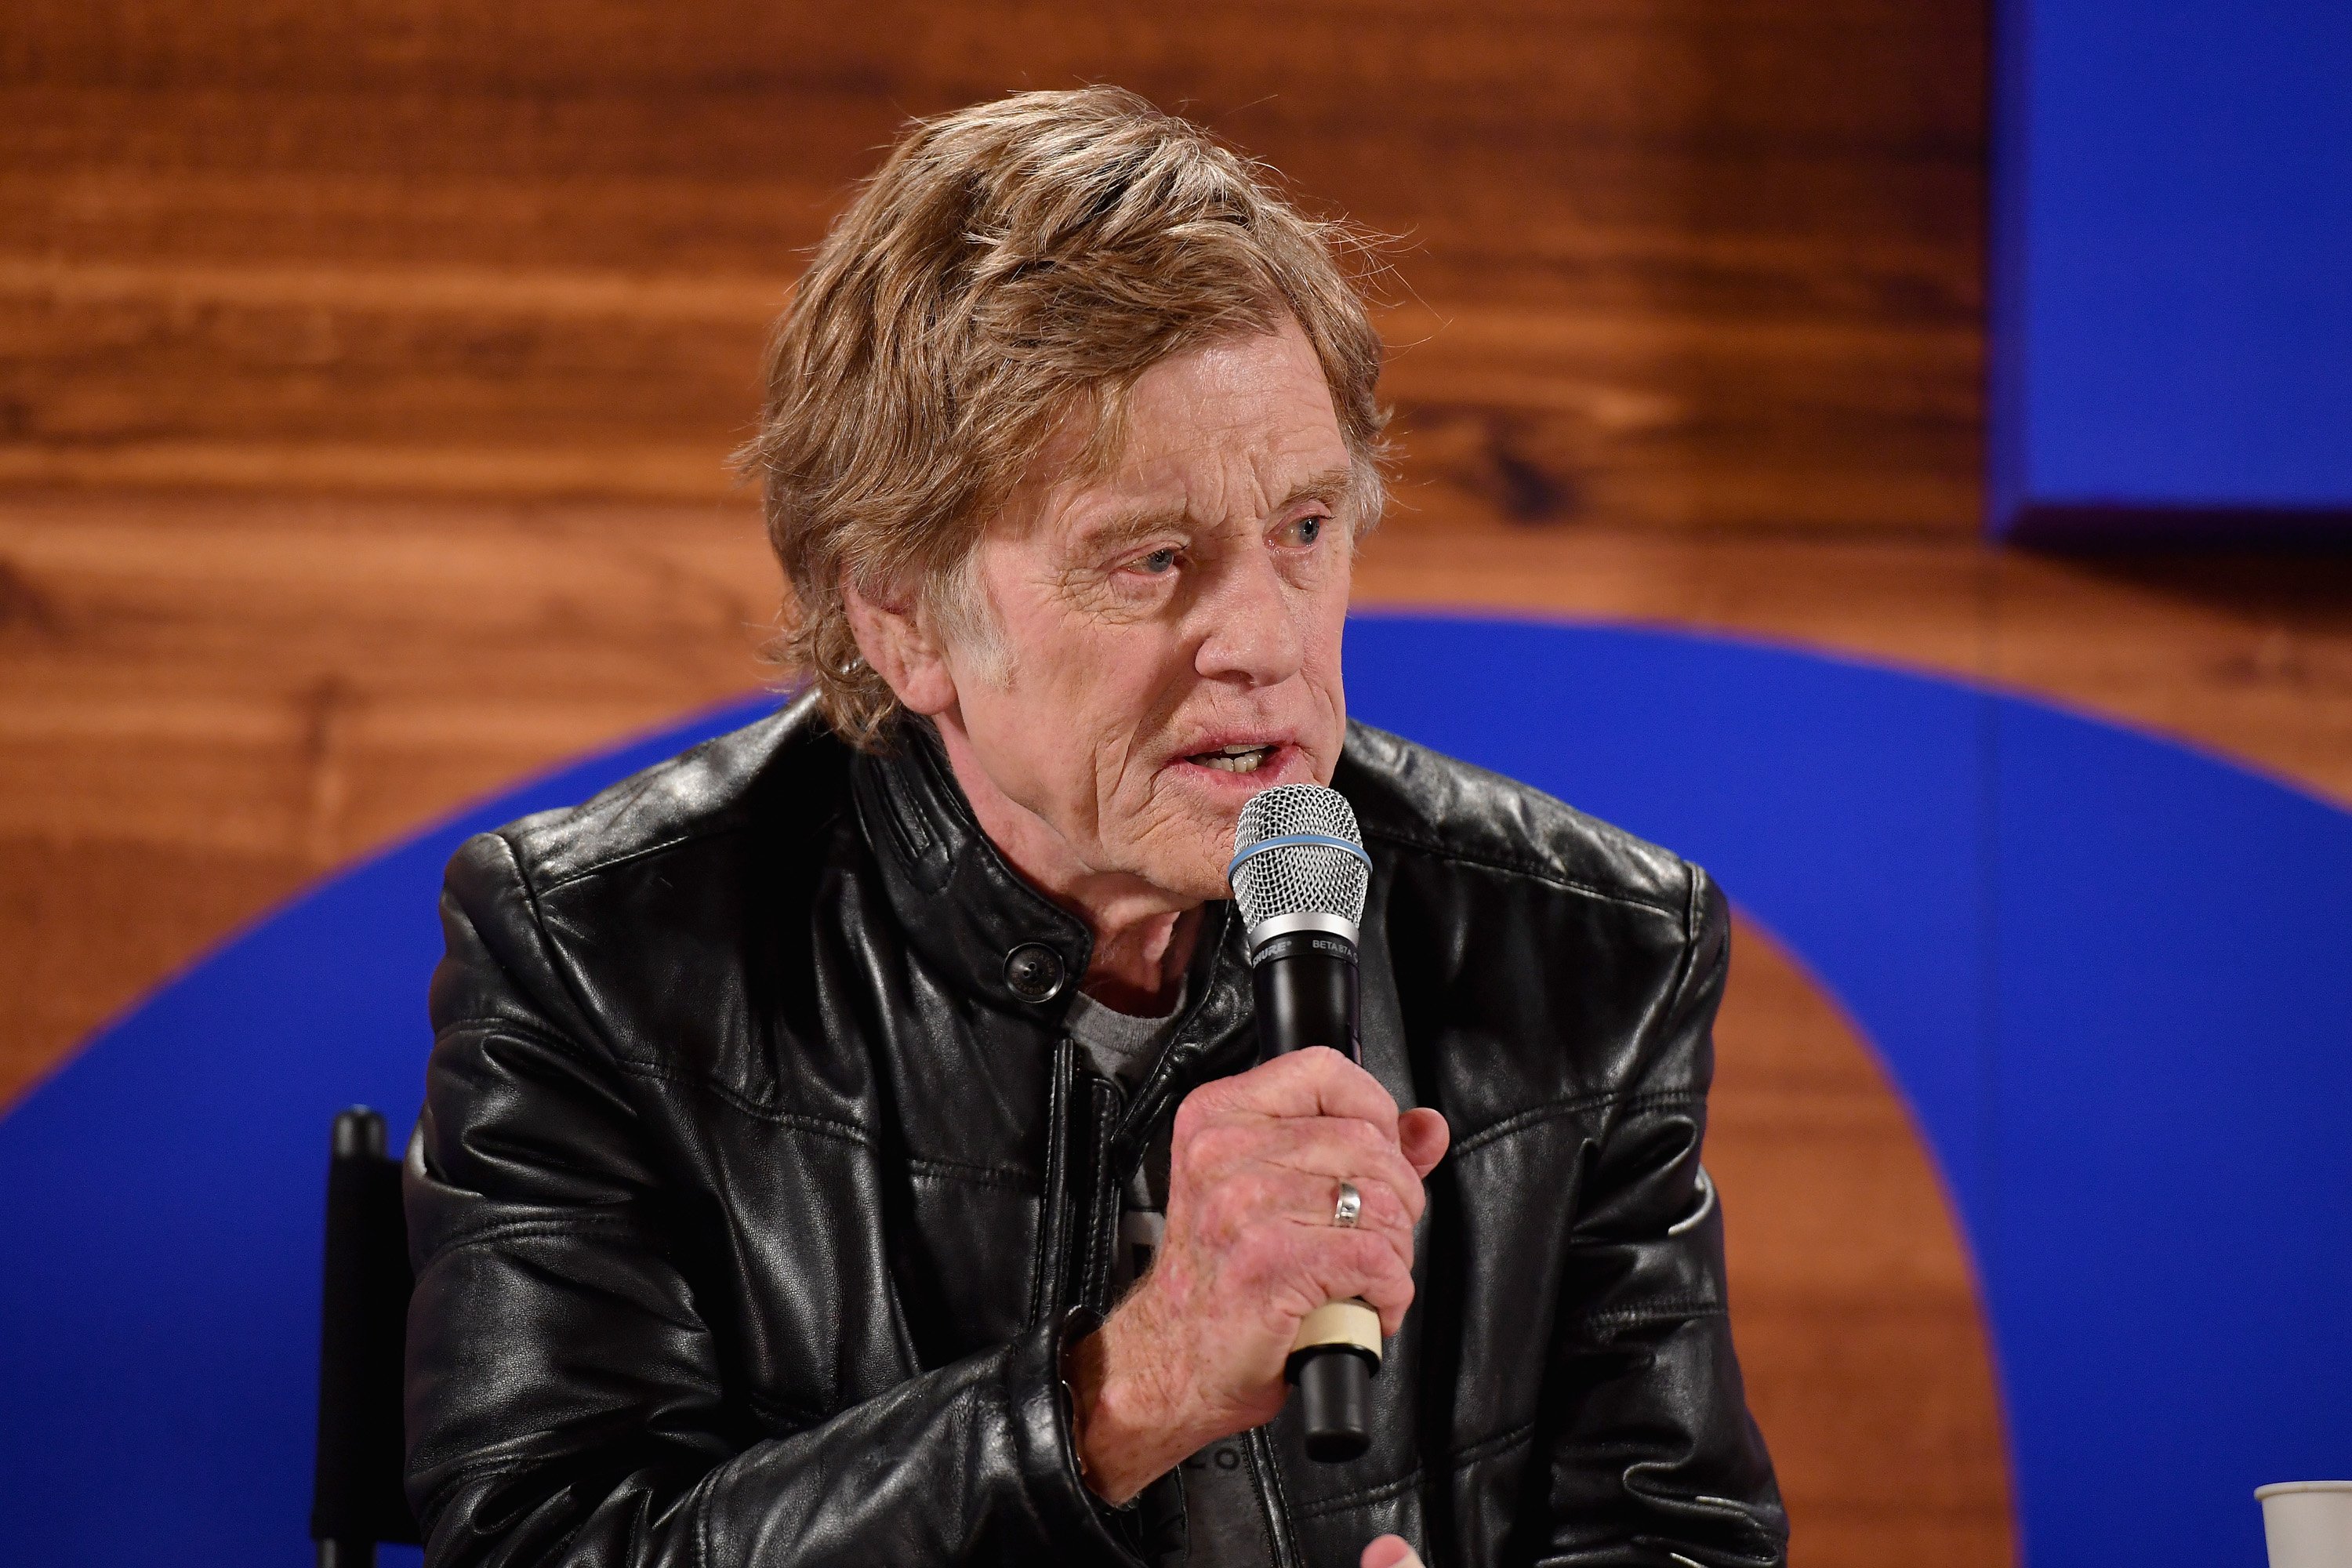 Robert Redford speaks onstage during the 2018 Sundance Film Festival. | Photo: Getty Images